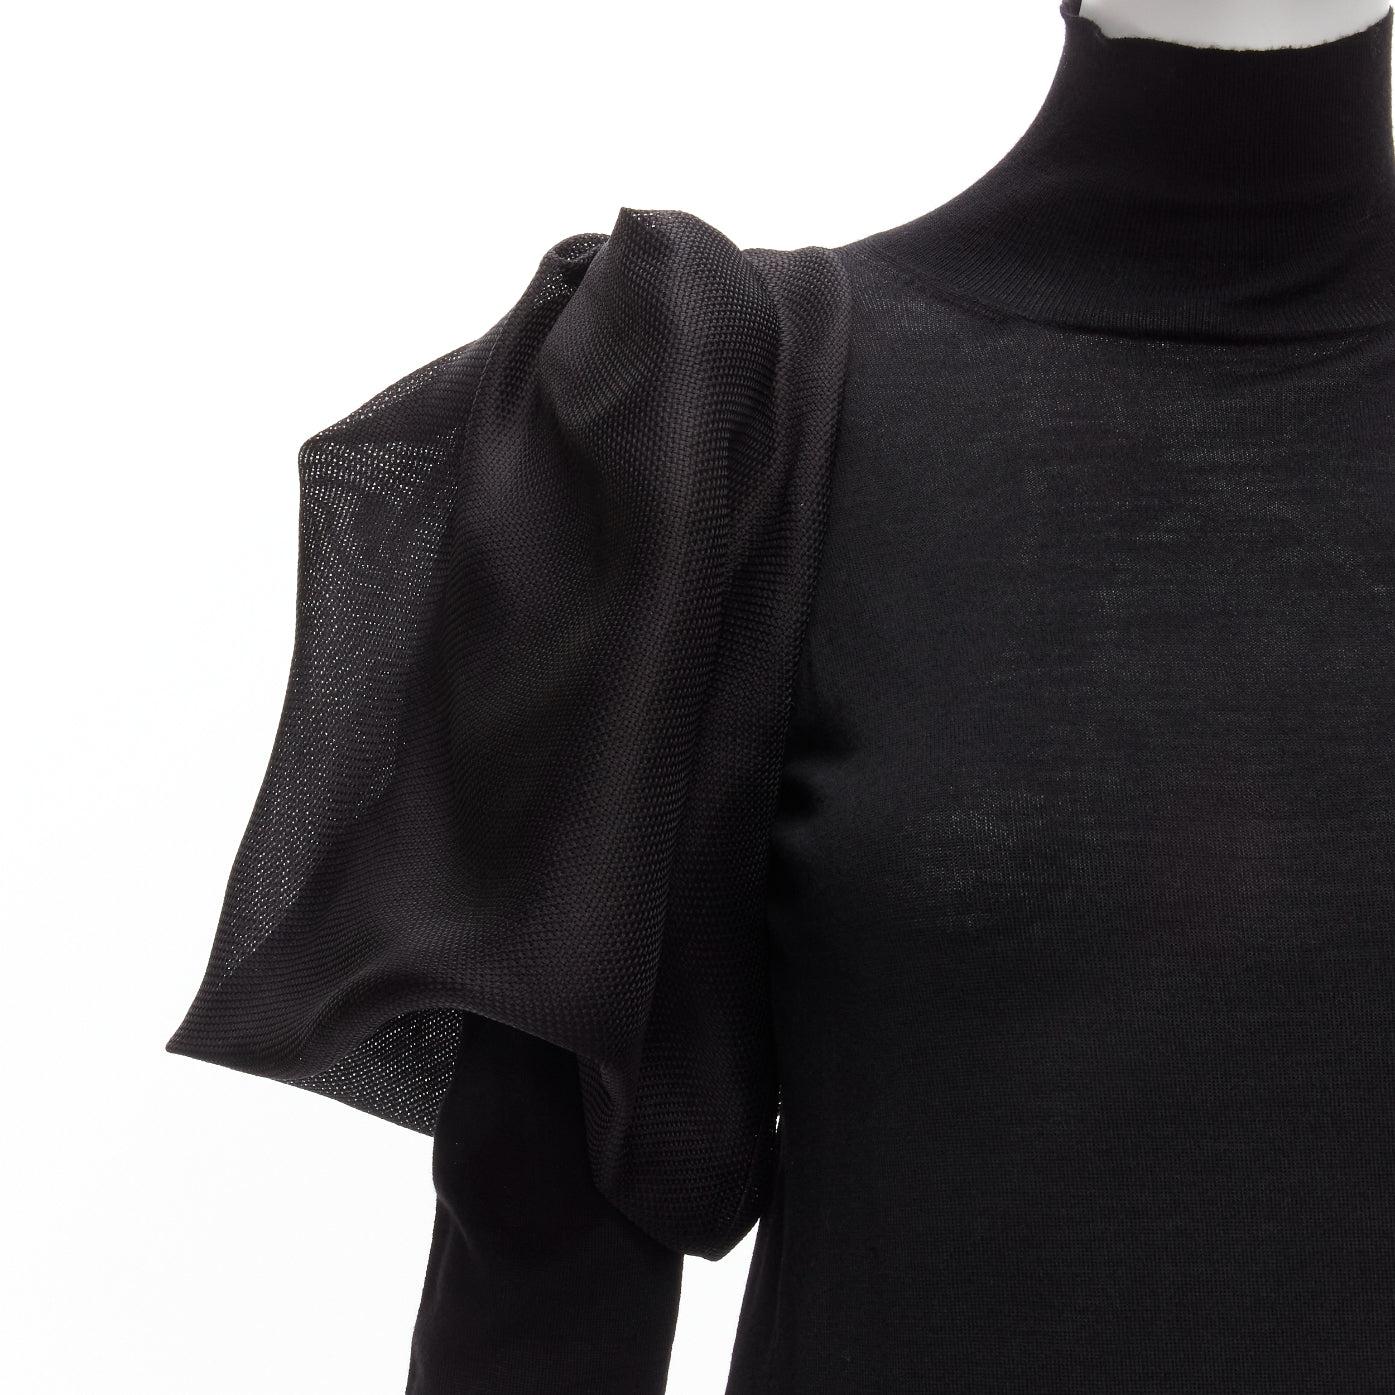 LANVIN 2011 black merino wool silk balloon puff sleeve turtleneck sweater S
Reference: TGAS/D00738
Brand: Lanvin
Designer: Alber Elbaz
Collection: 2011
Material: Merino Wool, Silk
Color: Black
Pattern: Solid
Closure: Pullover
Made in: